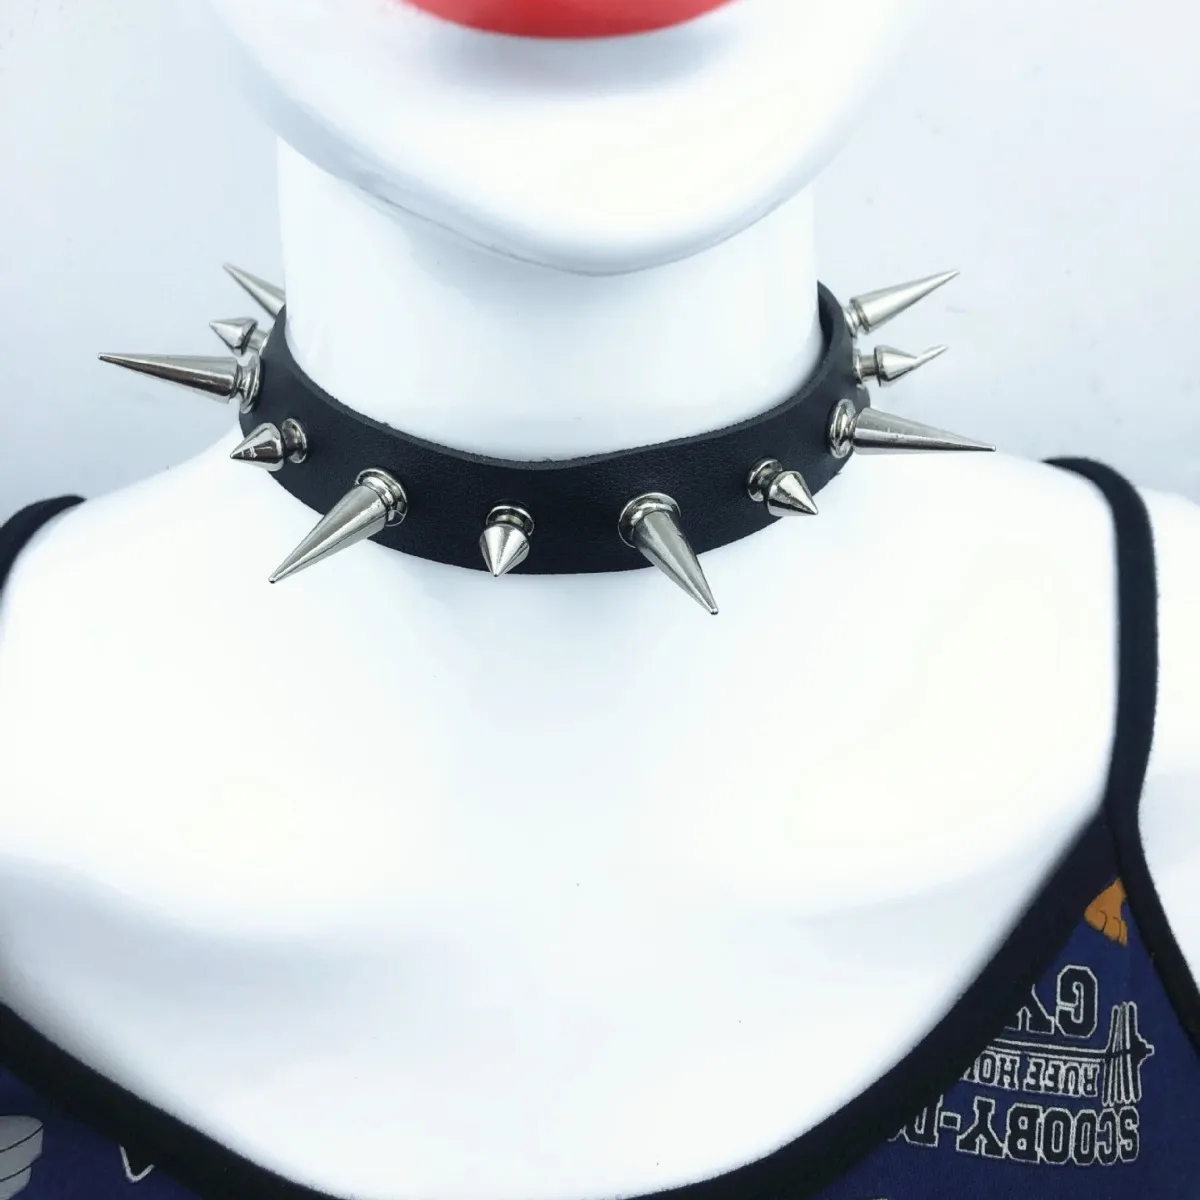 Chokers Gothic Black Spiked Punk Choker Collar Spikes Rivets Studded Chocker Necklace For Women Men Bondage Cosplay Goth Je Dhgarden Dha7B